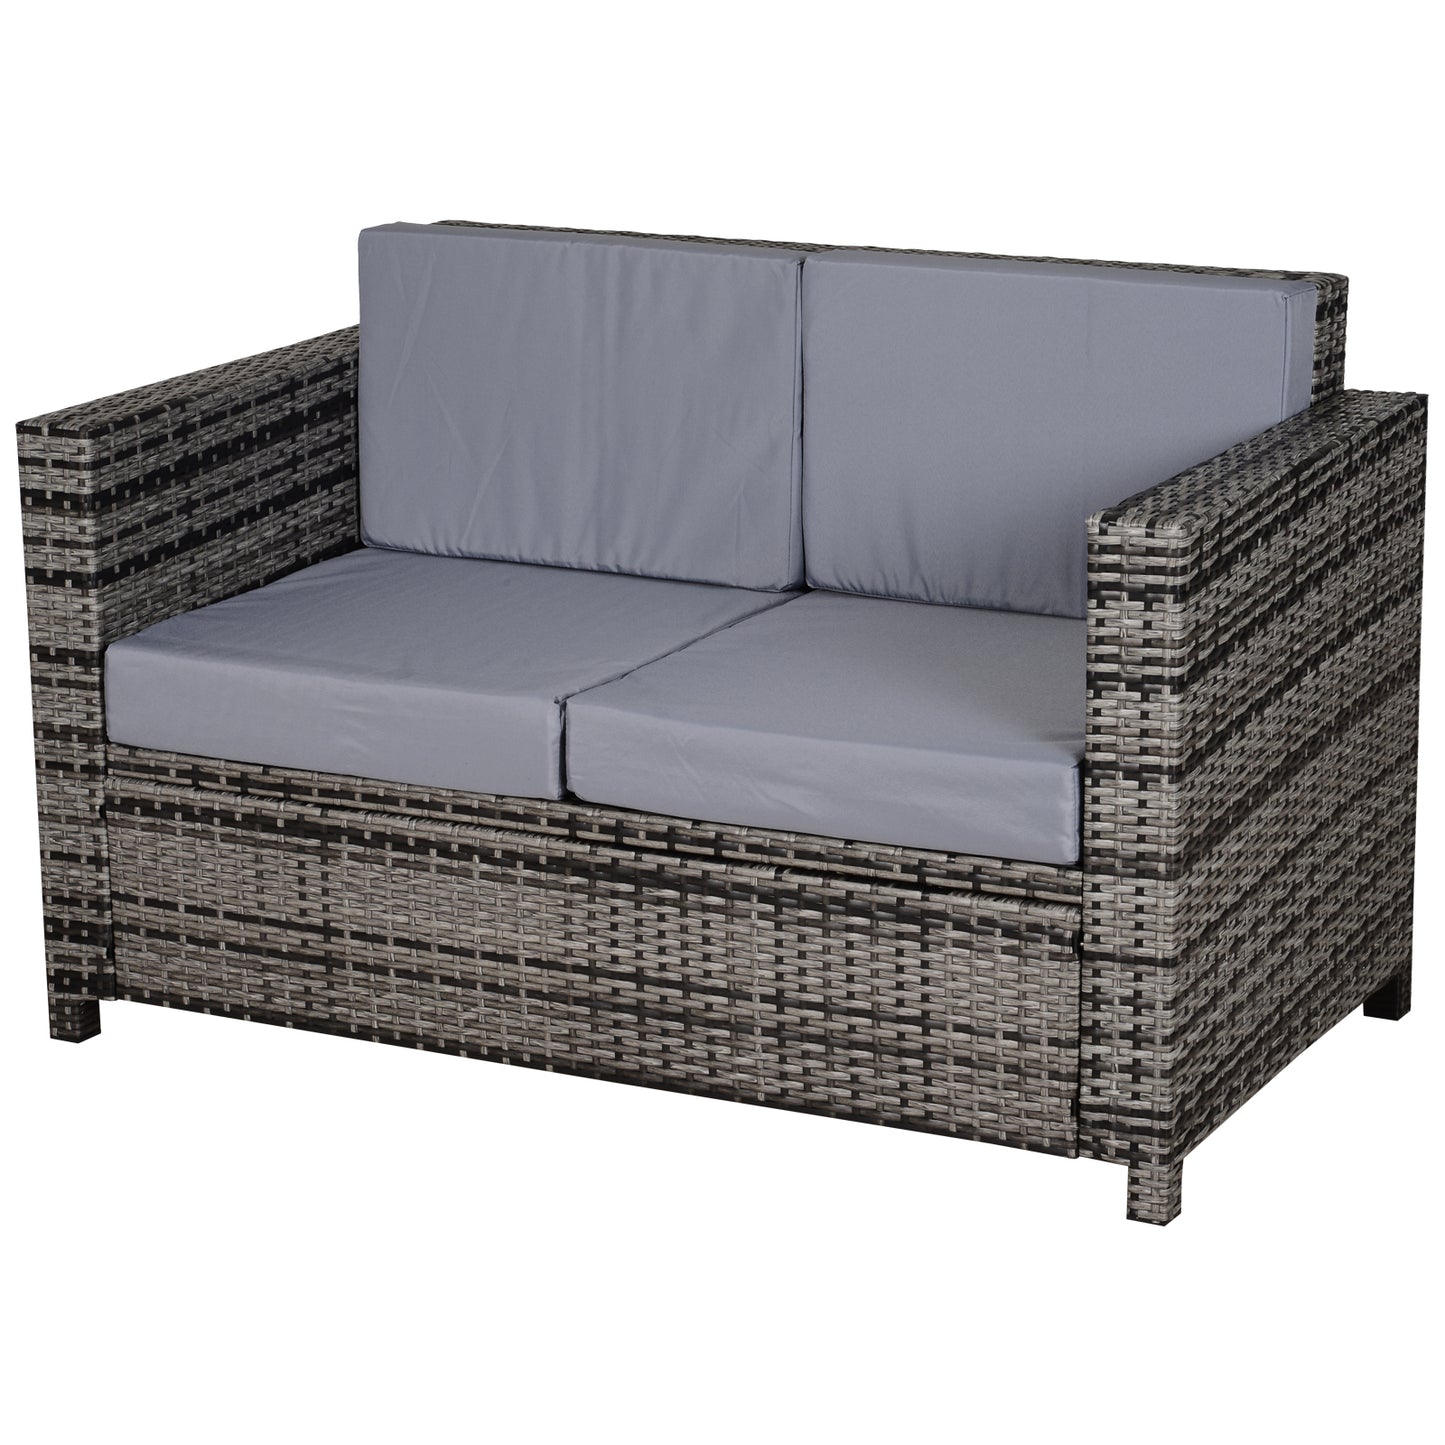 Outsunny 2-Seater Weather Resistant Outdoor Garden Rattan Sofa Chair Grey